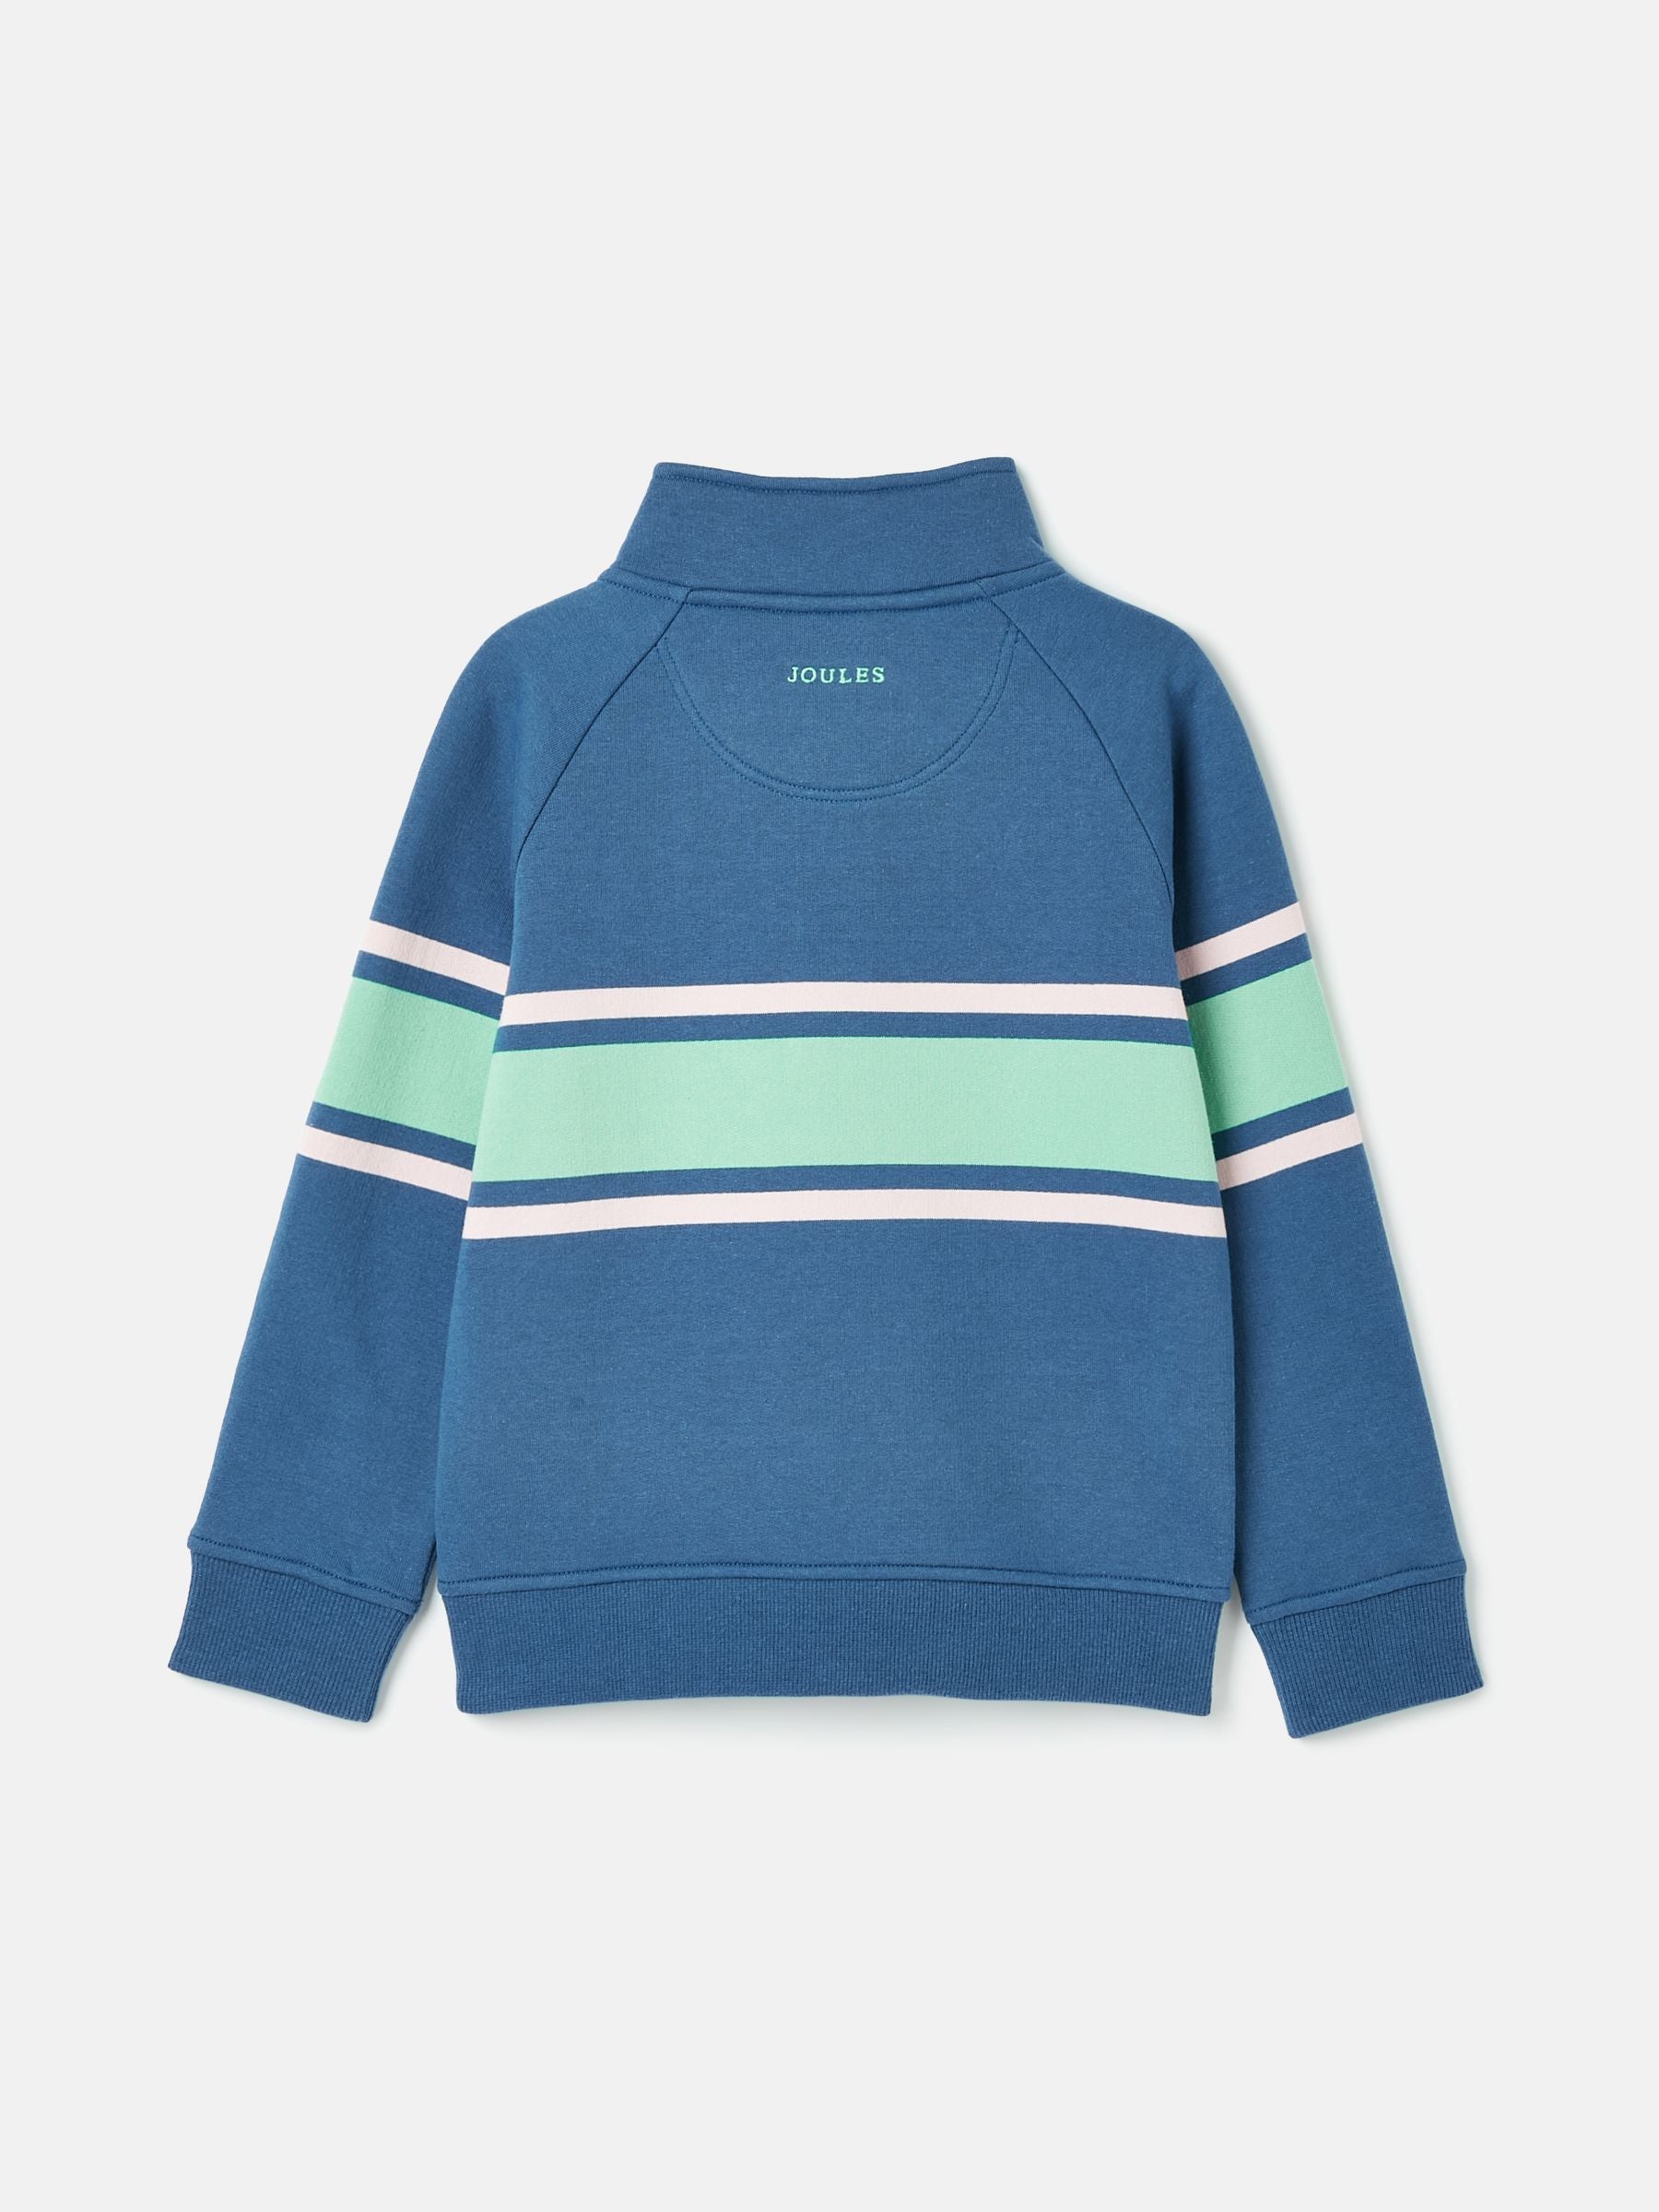 Buy Joules Cable Knit Quarter Zip Jumper from the Joules online shop